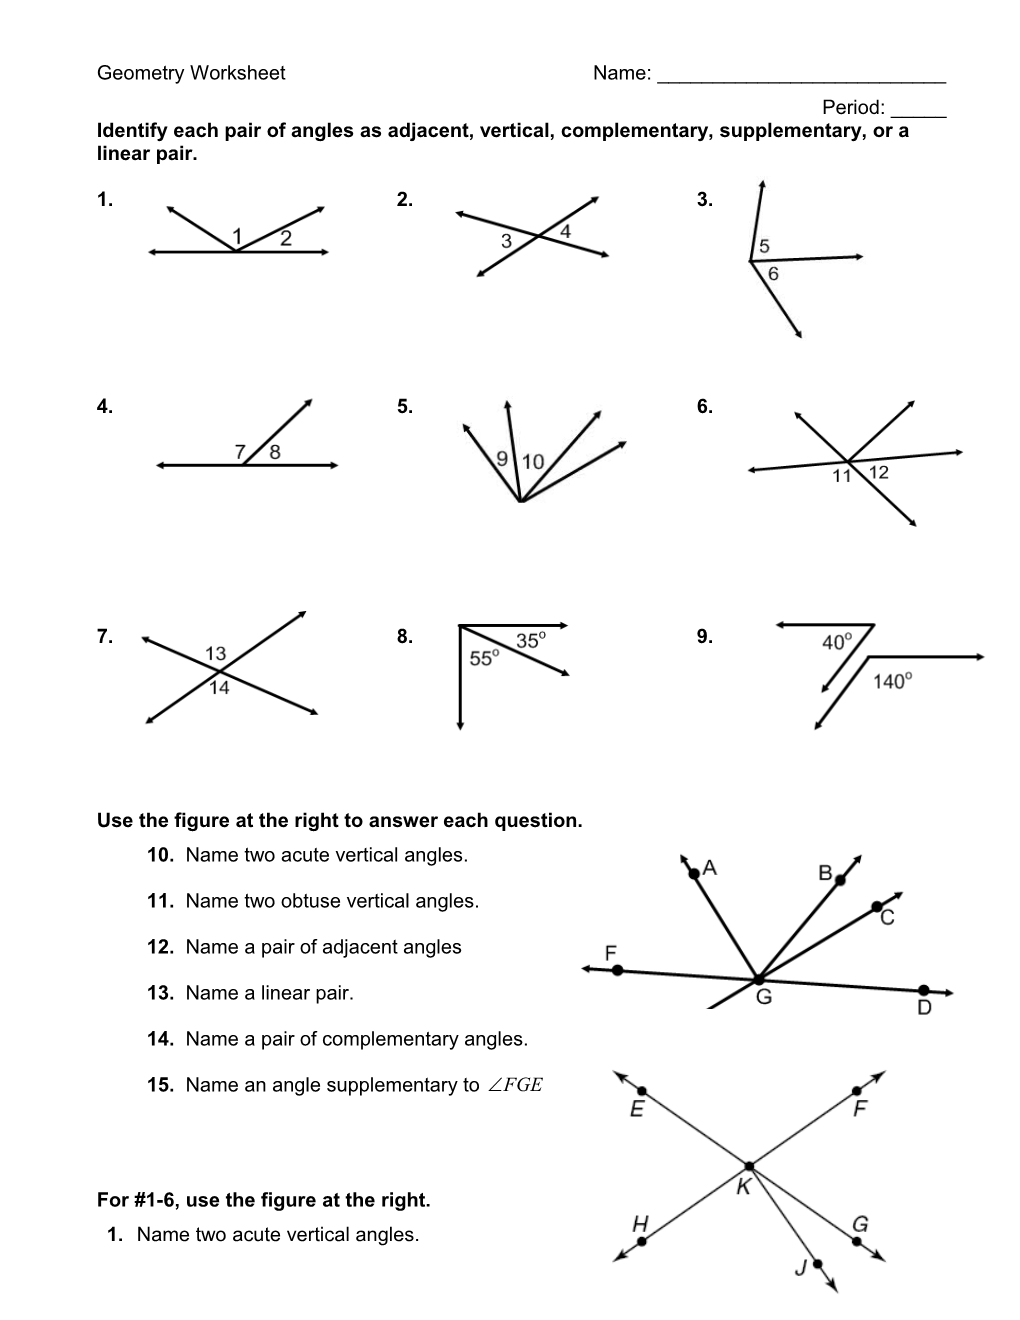 Identify Each Pair Of Angles As Adjacent, Vertical, Complementary, Supplementary, Or A Linear Pair